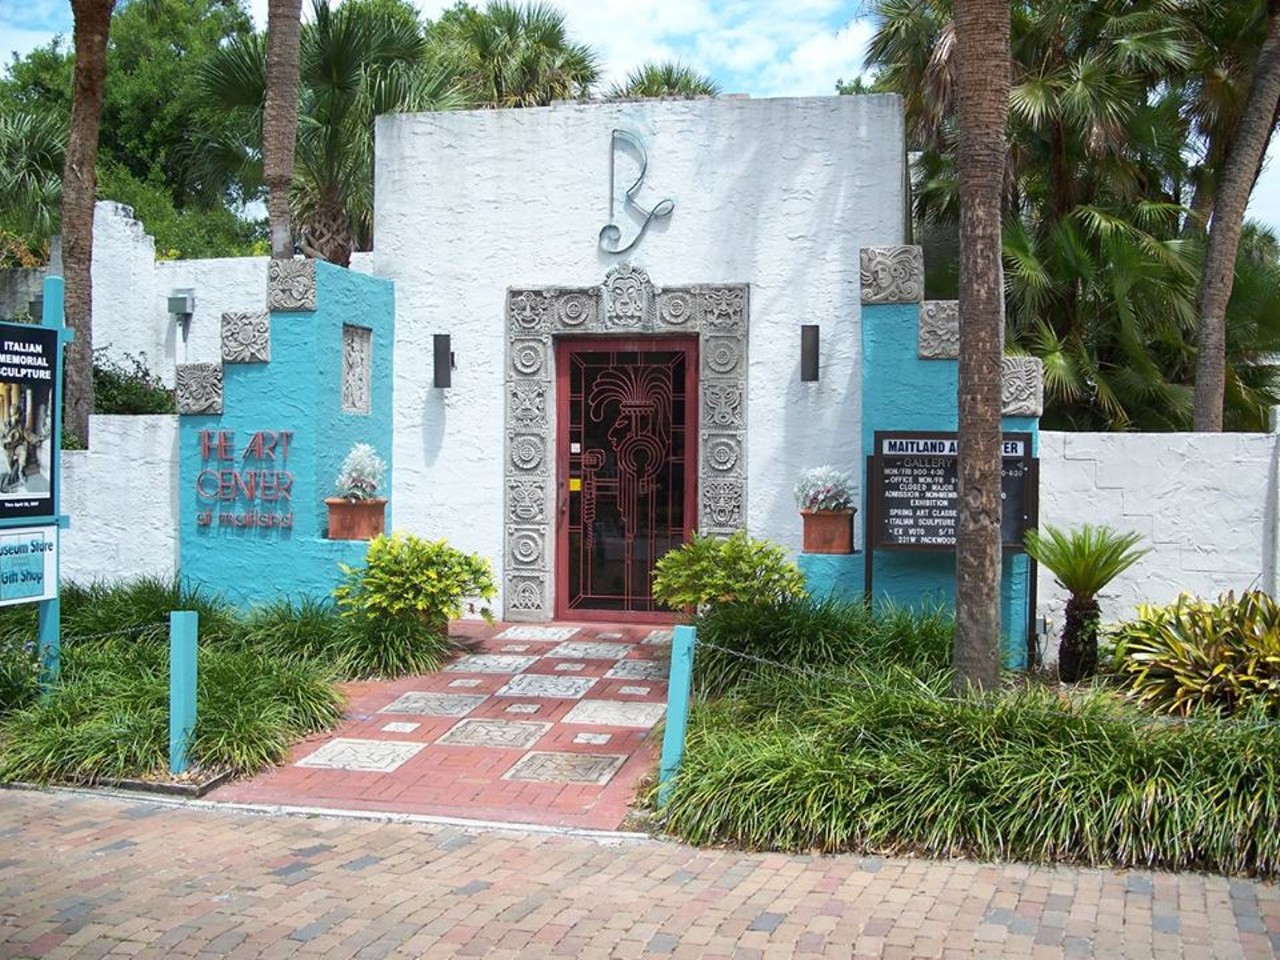 Maitland Art Center
231 W Packwood Ave, Maitland, 407-539-2181
Distance from Orlando: 20 minutes
The art center was founded in 1937 as an artist colony. It serves as an important example of Art Deco fantasy and Mayan Revival architecture.
Photo vi The Daniel Heitz Band/Facebook